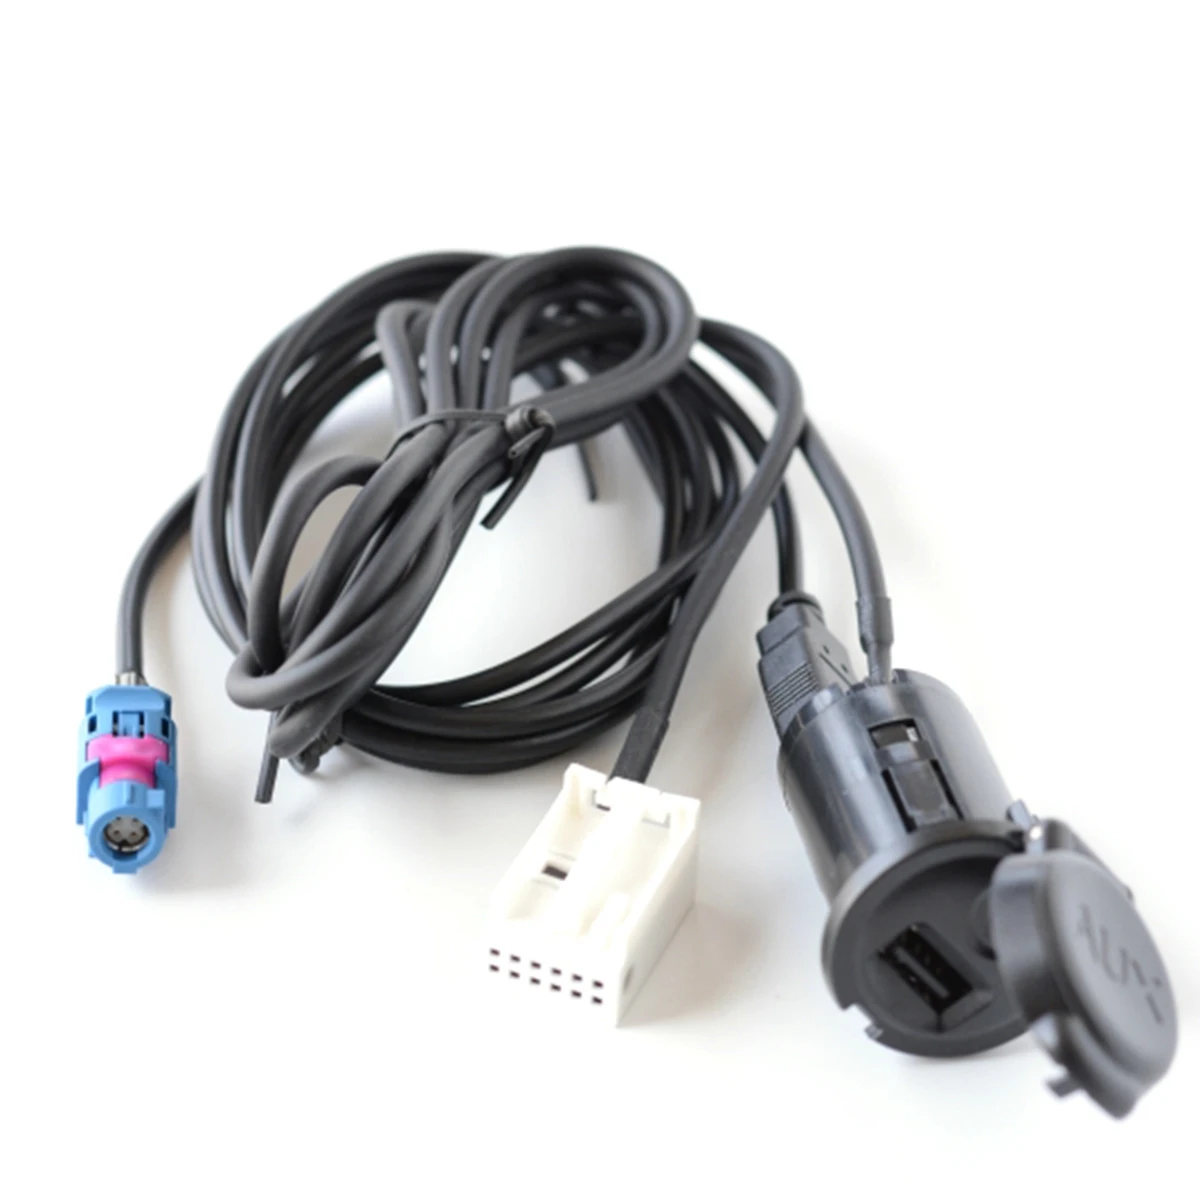 

Biurlink RD43 RD45 Stereo USB AUX Audio Cable Adapter for Peugeot 307 407 308 408 508 3008 Citroen C4 Sega DS